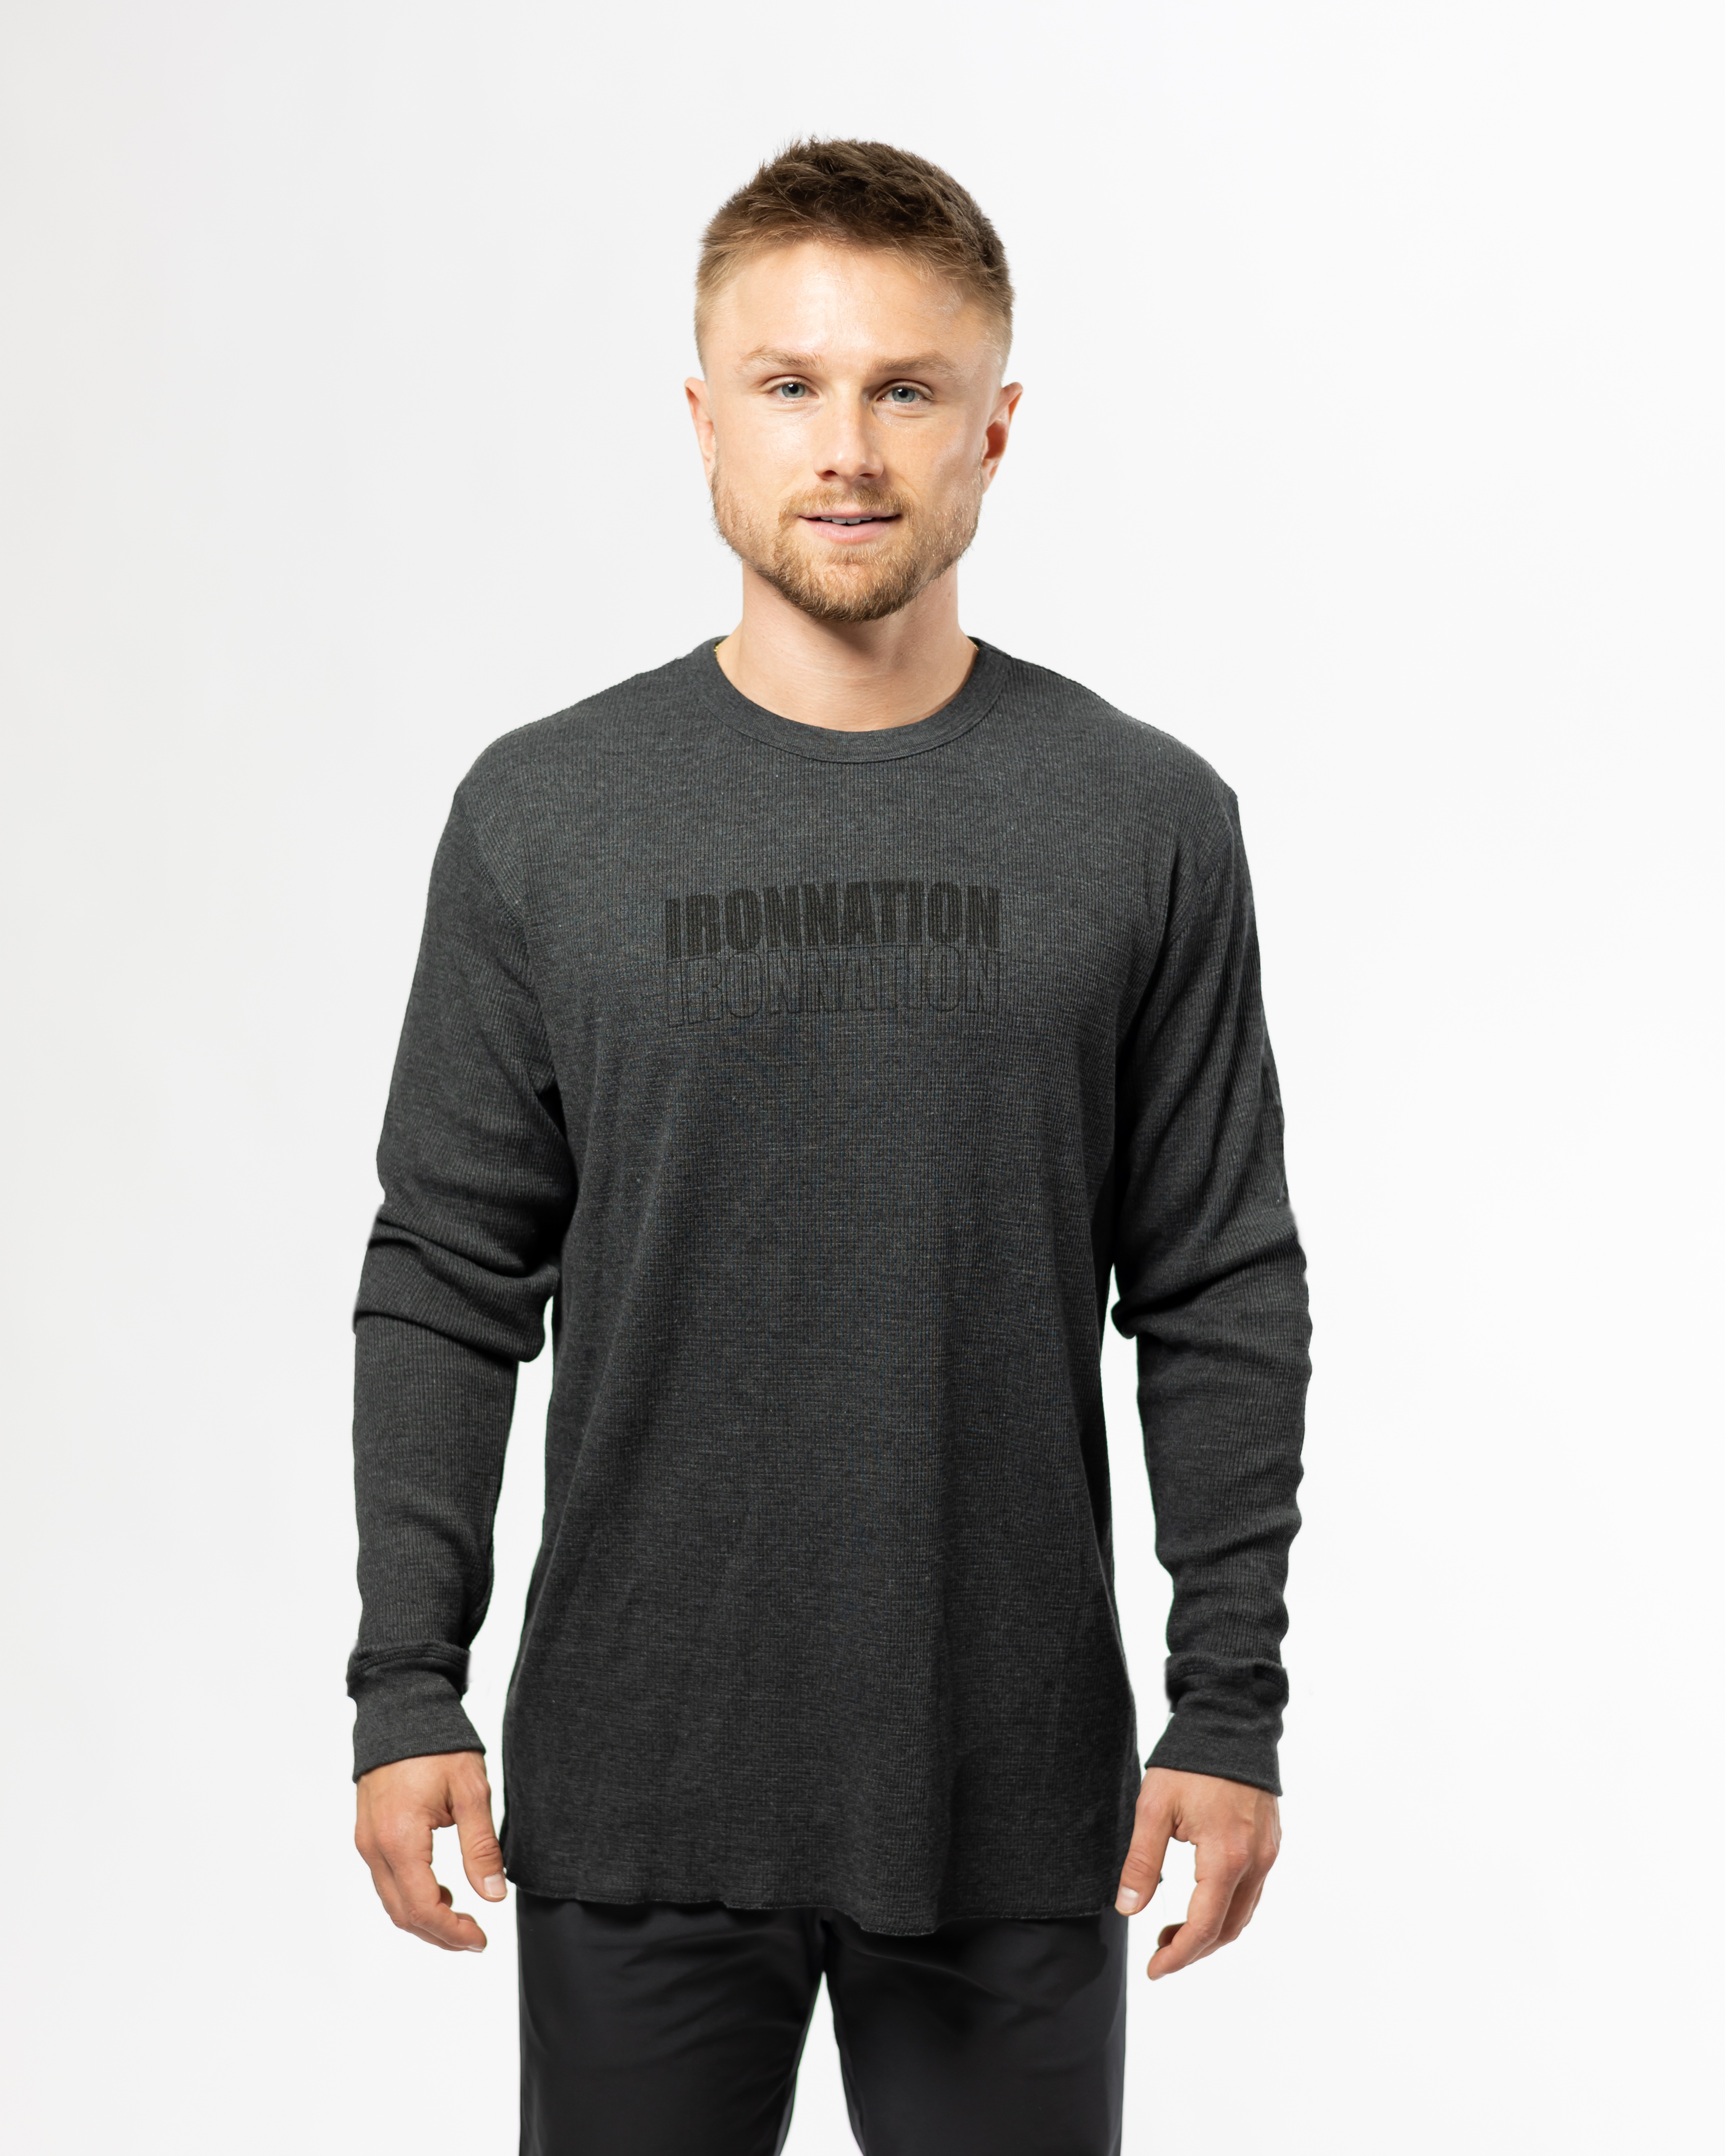 CHARCOAL IRONNATION THERMAL UNISEX